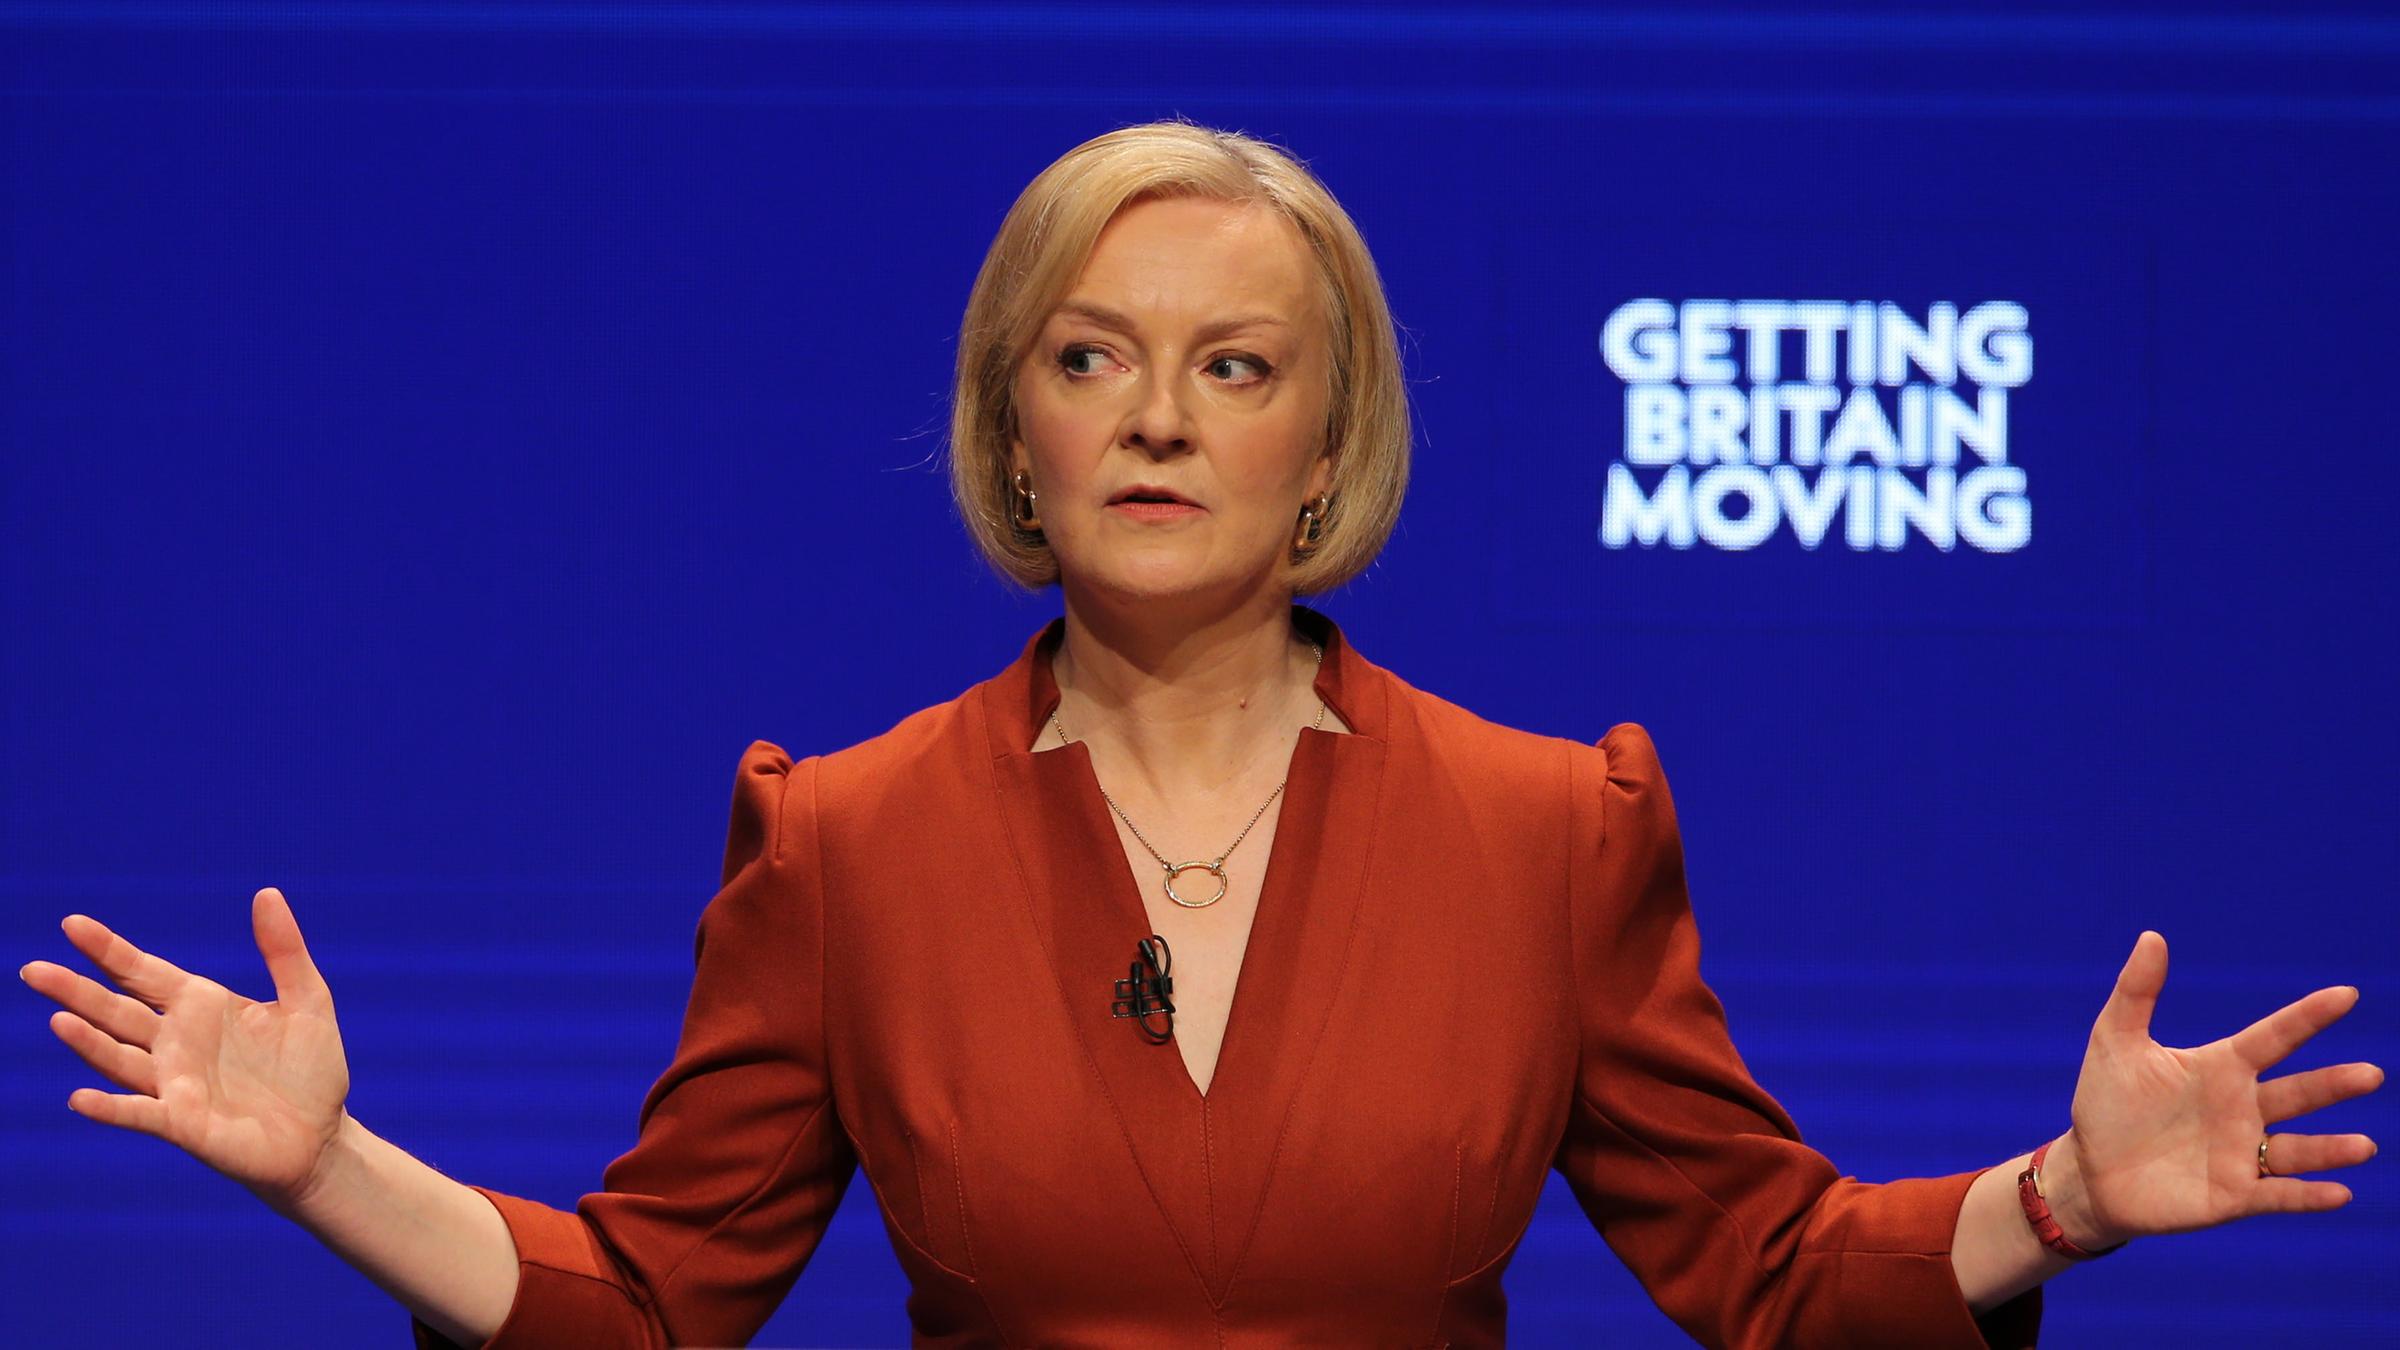 British Prime Minister Liz Truss delivers her keynote speech at the Conservative Party Conference in Birmingham